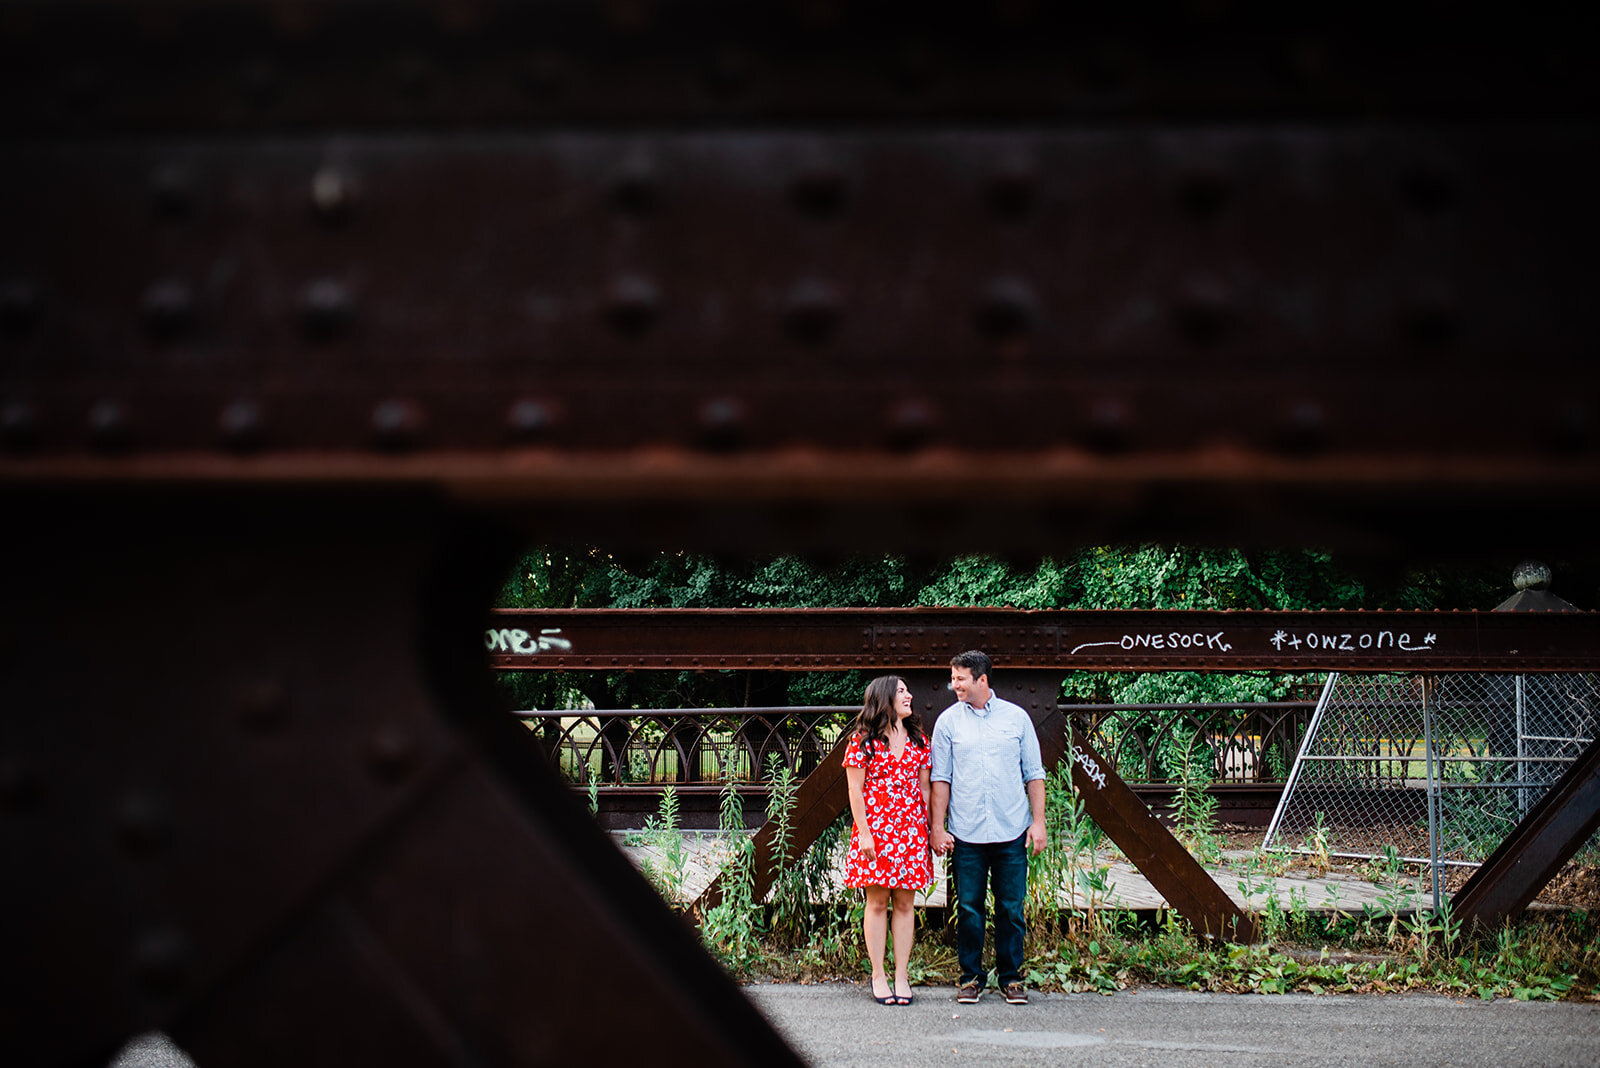 allegheny commons park engagement photos